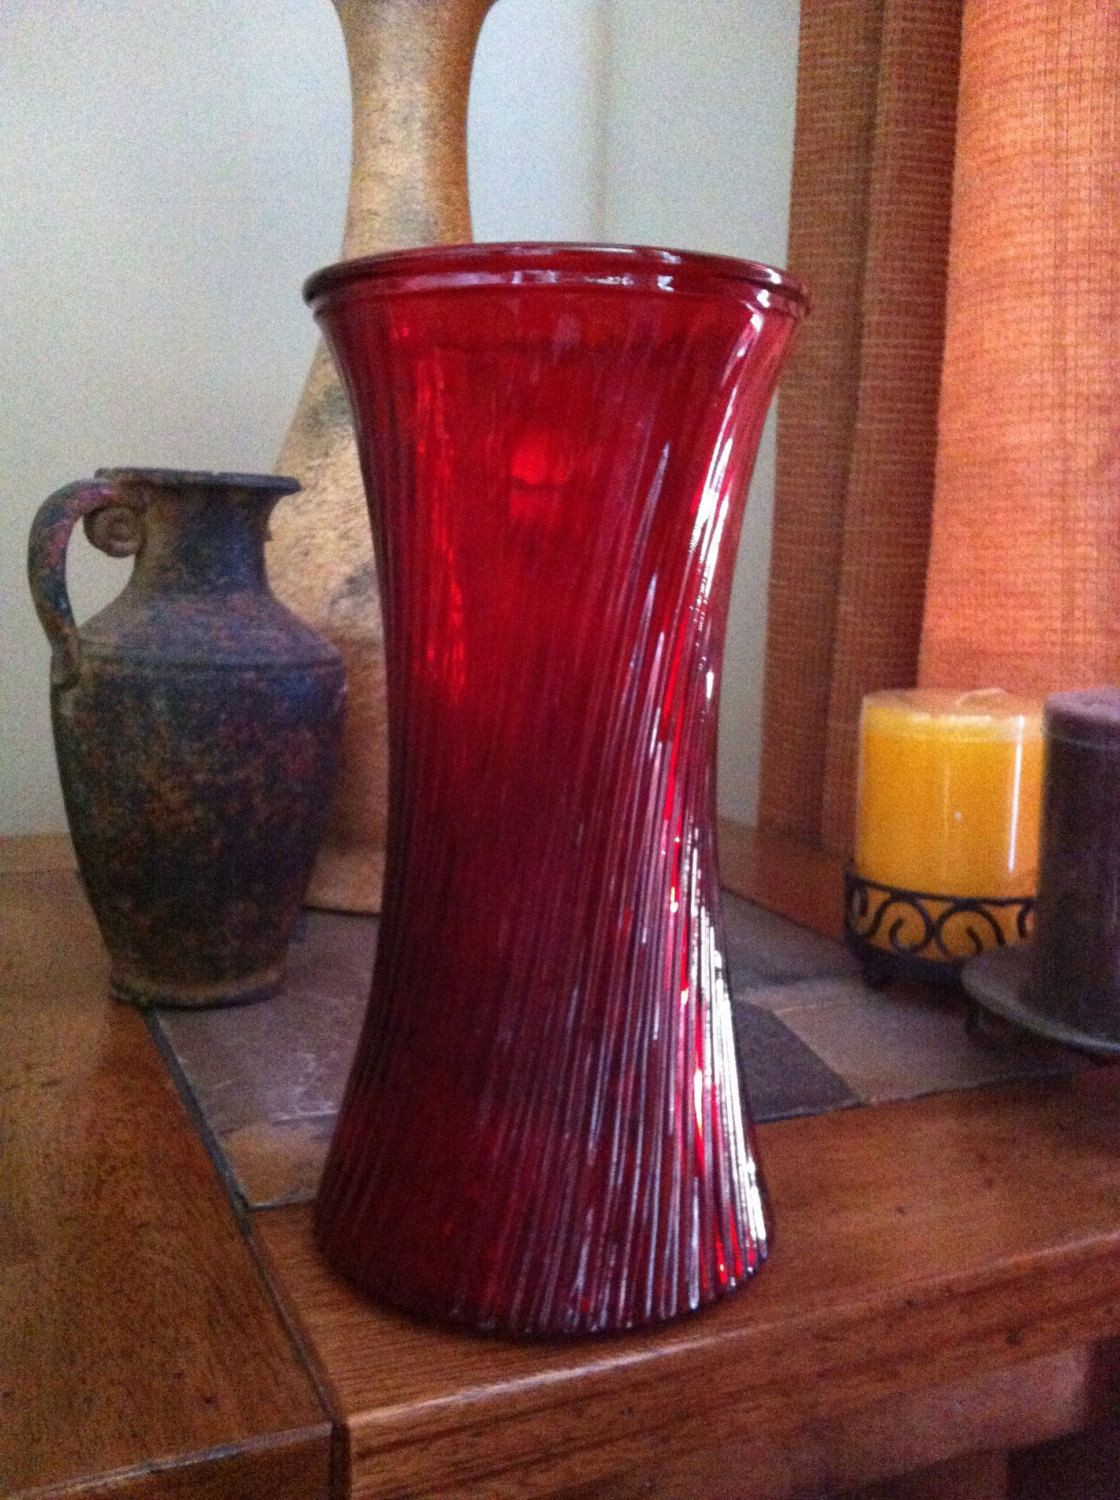 12 Elegant E O Brody Glass Vase 2024 free download e o brody glass vase of red 10 inch brody glass vase vintage vases and glass intended for red 10 inch brody glass vase